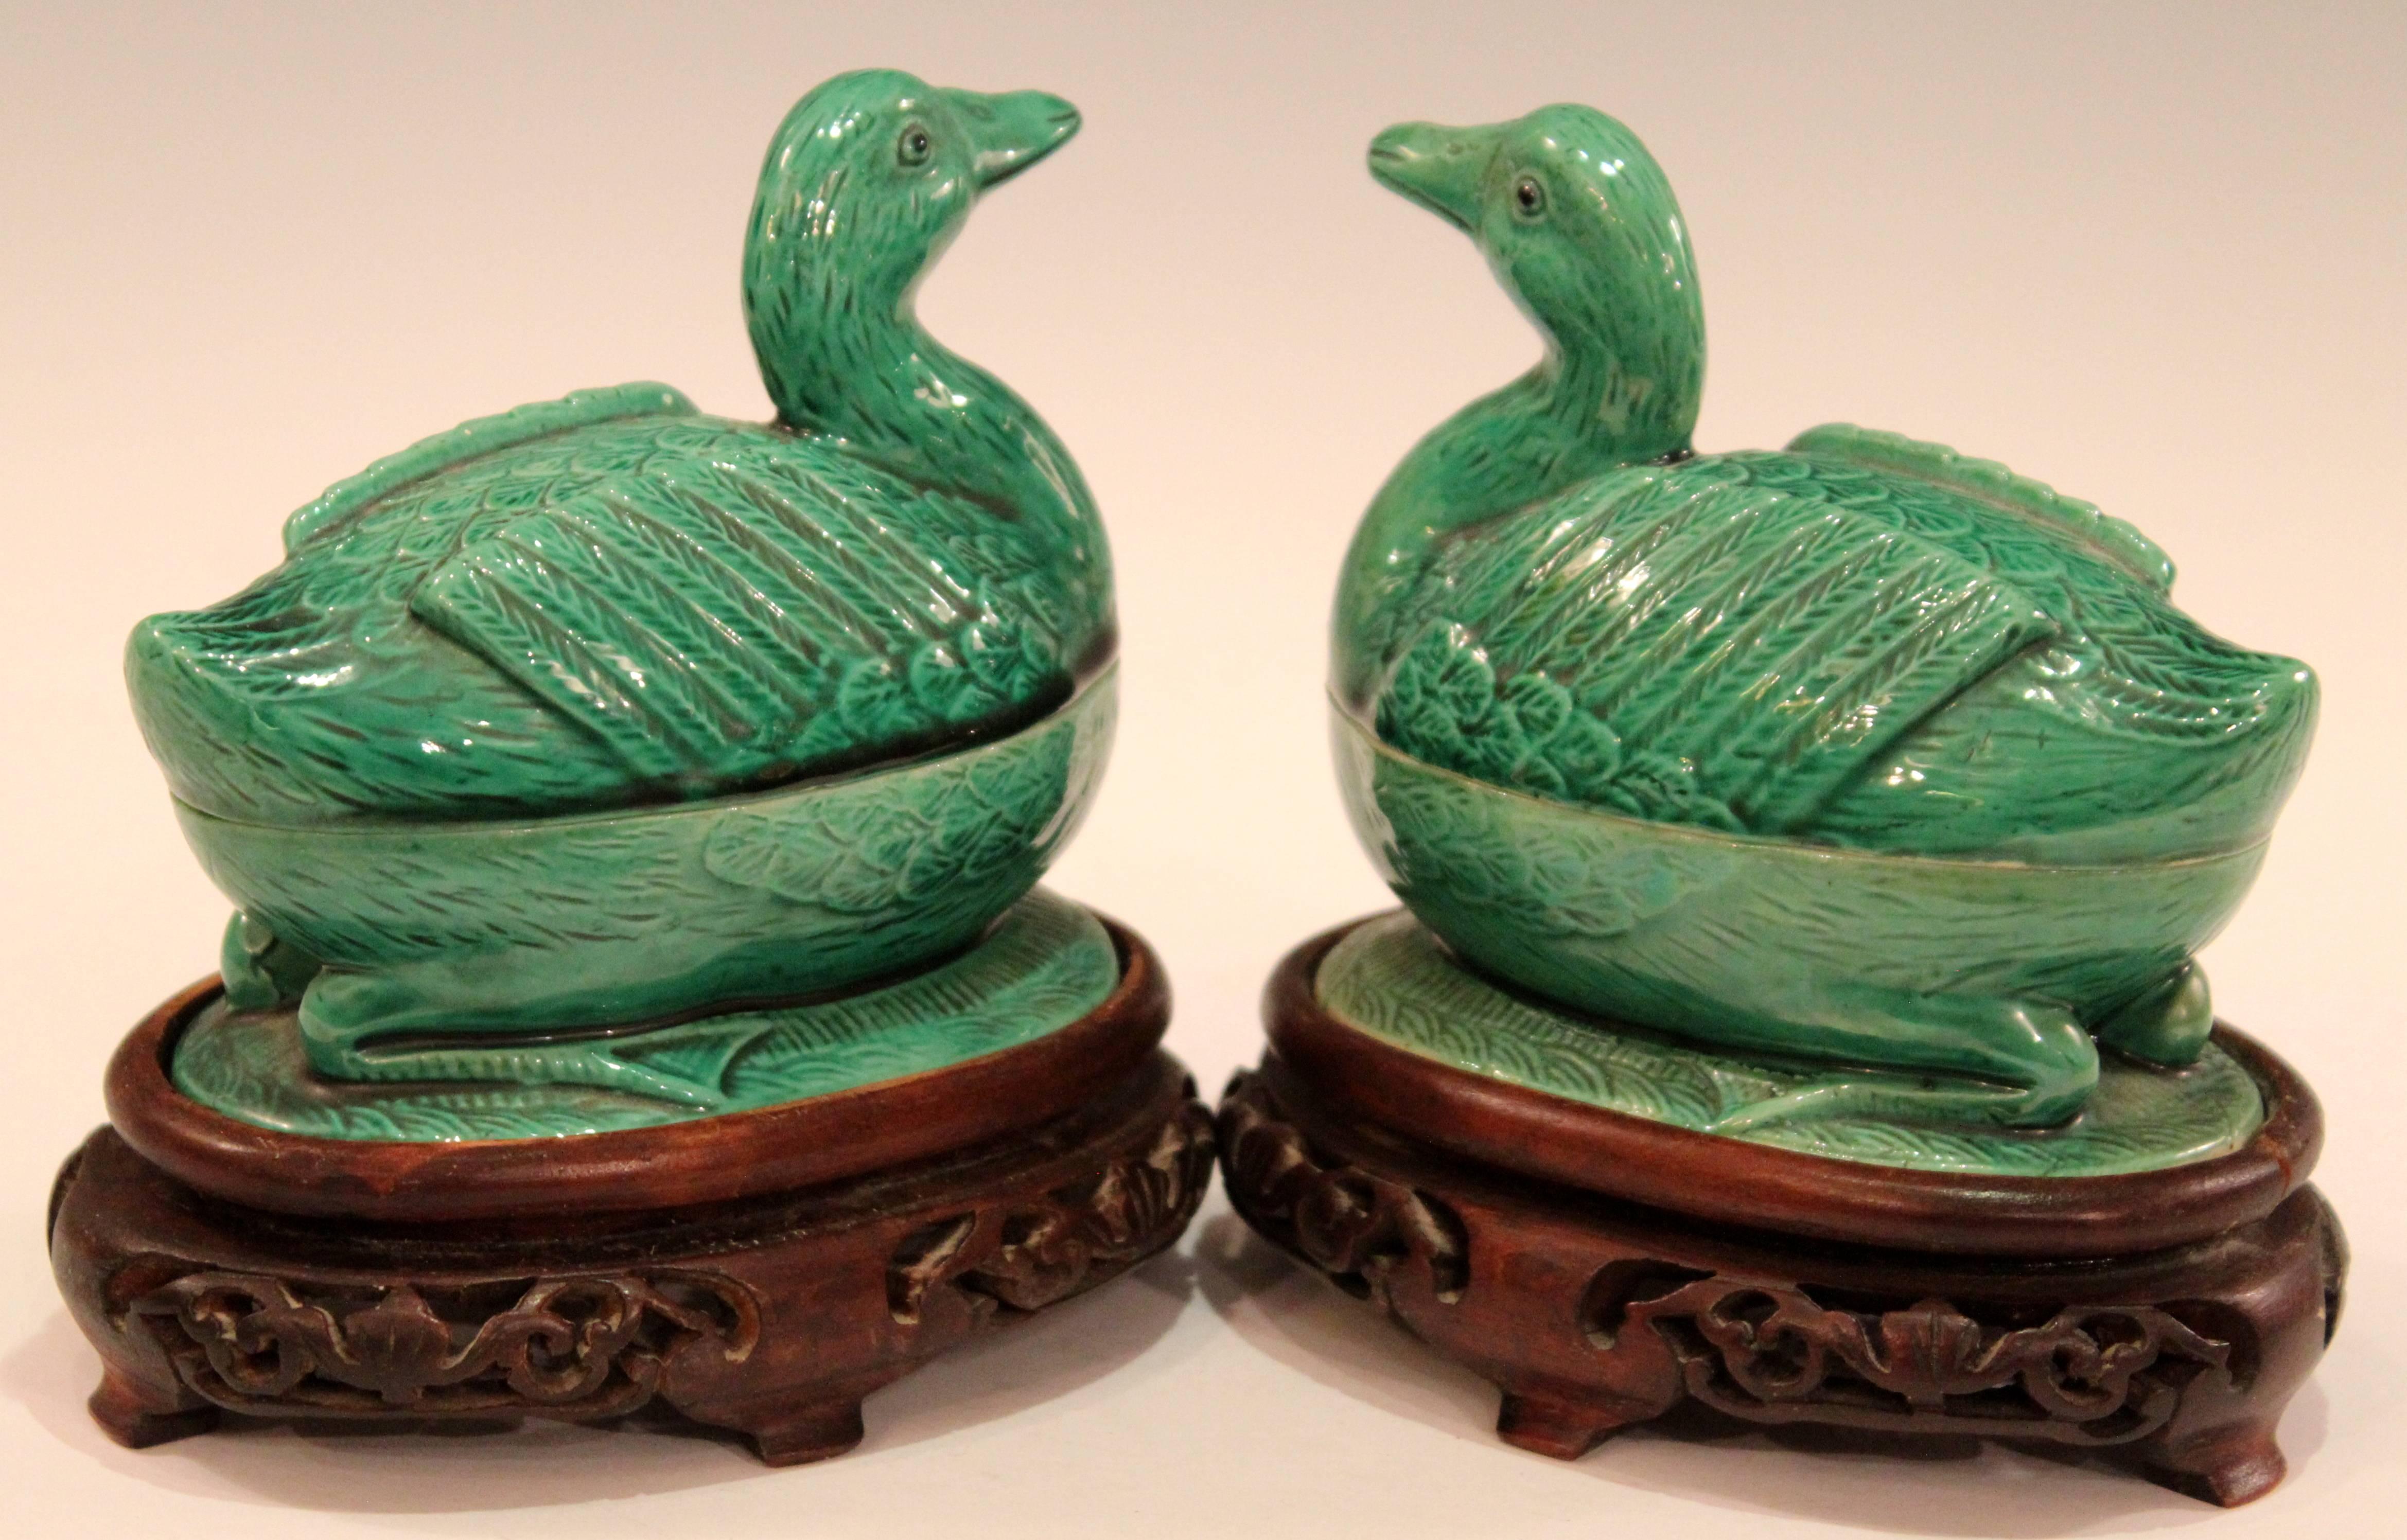 Pair of Chinese Porcelain Bird Figure Covered Boxes Ducks Geese Marked 1